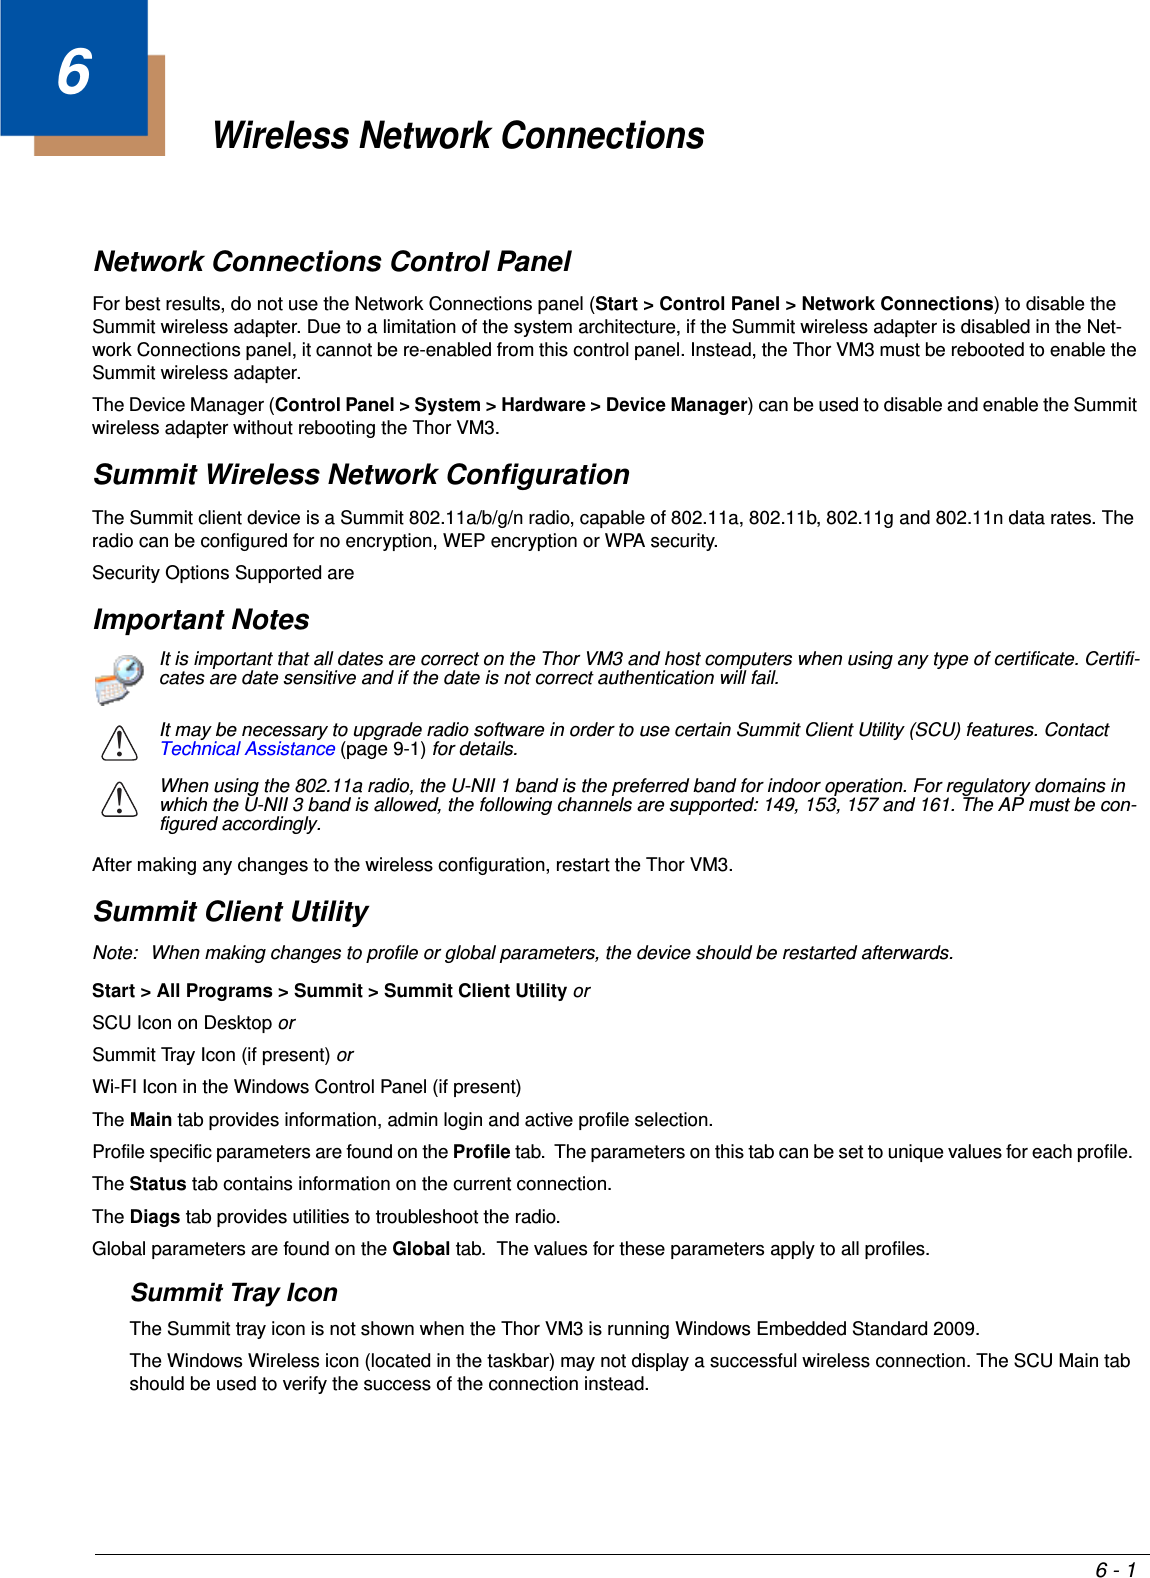 6 - 16Wireless Network ConnectionsNetwork Connections Control PanelFor best results, do not use the Network Connections panel (Start &gt; Control Panel &gt; Network Connections) to disable the Summit wireless adapter. Due to a limitation of the system architecture, if the Summit wireless adapter is disabled in the Net-work Connections panel, it cannot be re-enabled from this control panel. Instead, the Thor VM3 must be rebooted to enable the Summit wireless adapter.The Device Manager (Control Panel &gt; System &gt; Hardware &gt; Device Manager) can be used to disable and enable the Summit wireless adapter without rebooting the Thor VM3.Summit Wireless Network ConfigurationThe Summit client device is a Summit 802.11a/b/g/n radio, capable of 802.11a, 802.11b, 802.11g and 802.11n data rates. The radio can be configured for no encryption, WEP encryption or WPA security.Security Options Supported areImportant NotesAfter making any changes to the wireless configuration, restart the Thor VM3.Summit Client UtilityNote: When making changes to profile or global parameters, the device should be restarted afterwards.Start &gt; All Programs &gt; Summit &gt; Summit Client Utility or SCU Icon on Desktop orSummit Tray Icon (if present) orWi-FI Icon in the Windows Control Panel (if present)The Main tab provides information, admin login and active profile selection.Profile specific parameters are found on the Profile tab.  The parameters on this tab can be set to unique values for each profile.  The Status tab contains information on the current connection.The Diags tab provides utilities to troubleshoot the radio.Global parameters are found on the Global tab.  The values for these parameters apply to all profiles.Summit Tray IconThe Summit tray icon is not shown when the Thor VM3 is running Windows Embedded Standard 2009.The Windows Wireless icon (located in the taskbar) may not display a successful wireless connection. The SCU Main tab should be used to verify the success of the connection instead.It is important that all dates are correct on the Thor VM3 and host computers when using any type of certificate. Certifi-cates are date sensitive and if the date is not correct authentication will fail.It may be necessary to upgrade radio software in order to use certain Summit Client Utility (SCU) features. Contact Technical Assistance (page 9-1) for details.When using the 802.11a radio, the U-NII 1 band is the preferred band for indoor operation. For regulatory domains in which the U-NII 3 band is allowed, the following channels are supported: 149, 153, 157 and 161. The AP must be con-figured accordingly.!!